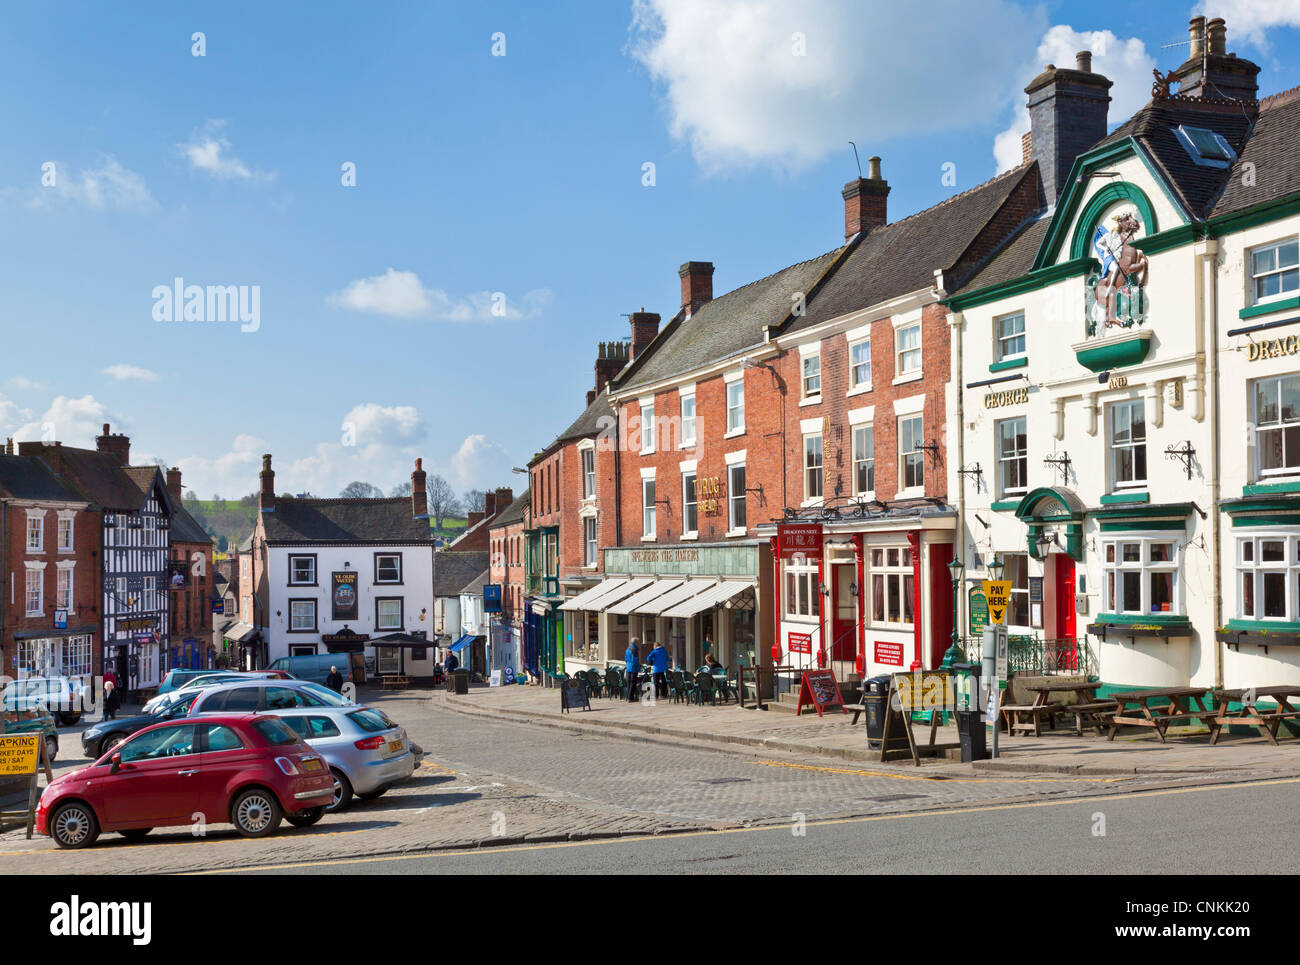 Town centre shops and parked cars in the Market Place Ashbourne Derbyshire England UK GB EU Europe Stock Photo